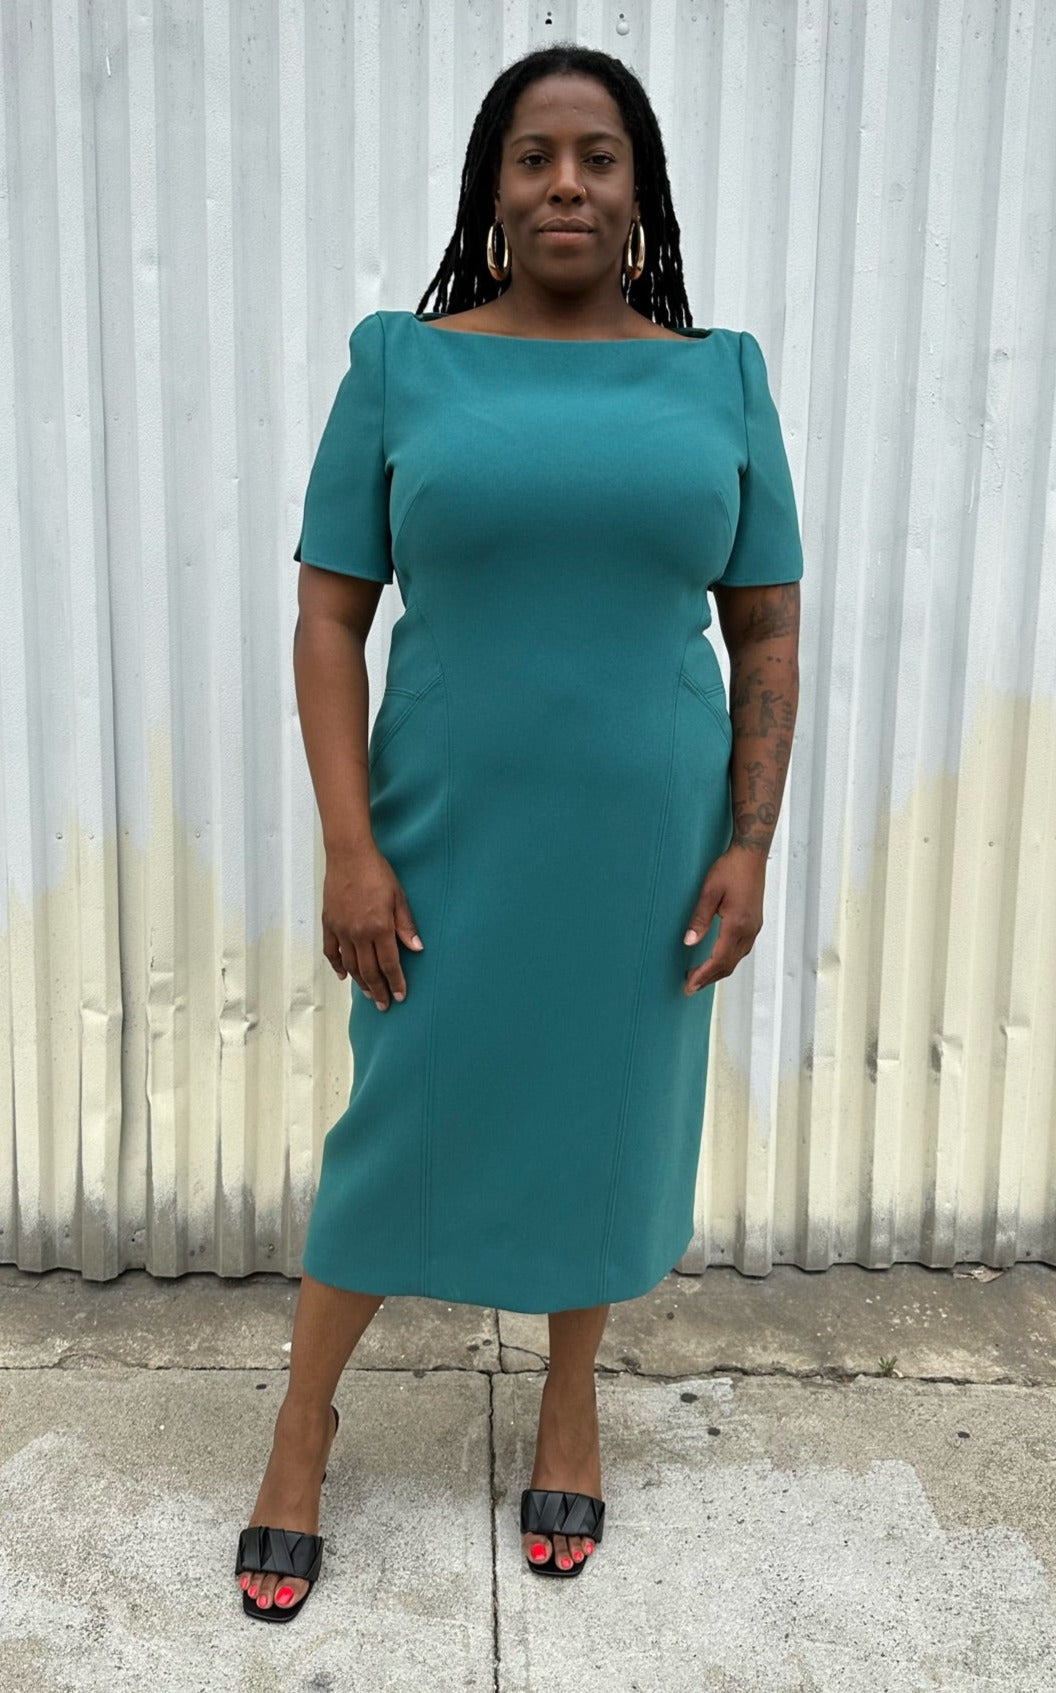 Full-body front view of a size 16 Zac Posen via 11 Honoré teal boatneck sheath dress styled with black kitten heels on a size 14/16 model. The photo is taken outside in natural lighting.